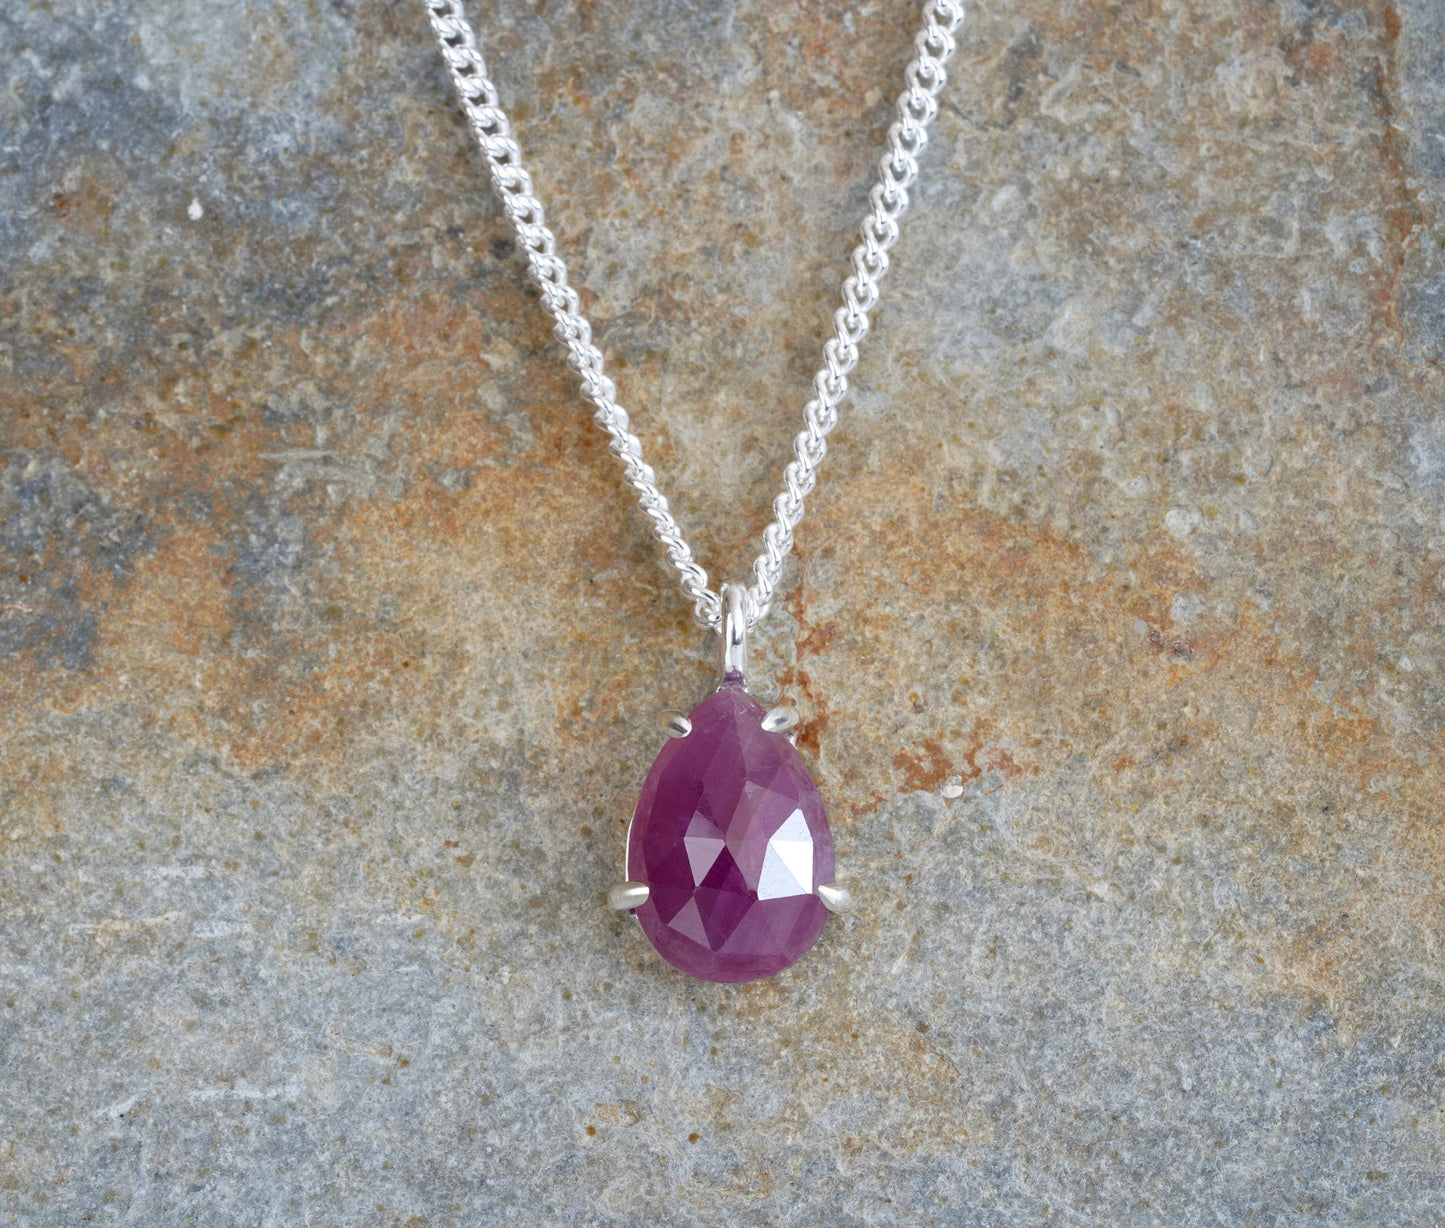 4.5ct Pink Sapphire Necklace, Prong Set Sapphire Necklace, Natural Sapphire Necklace